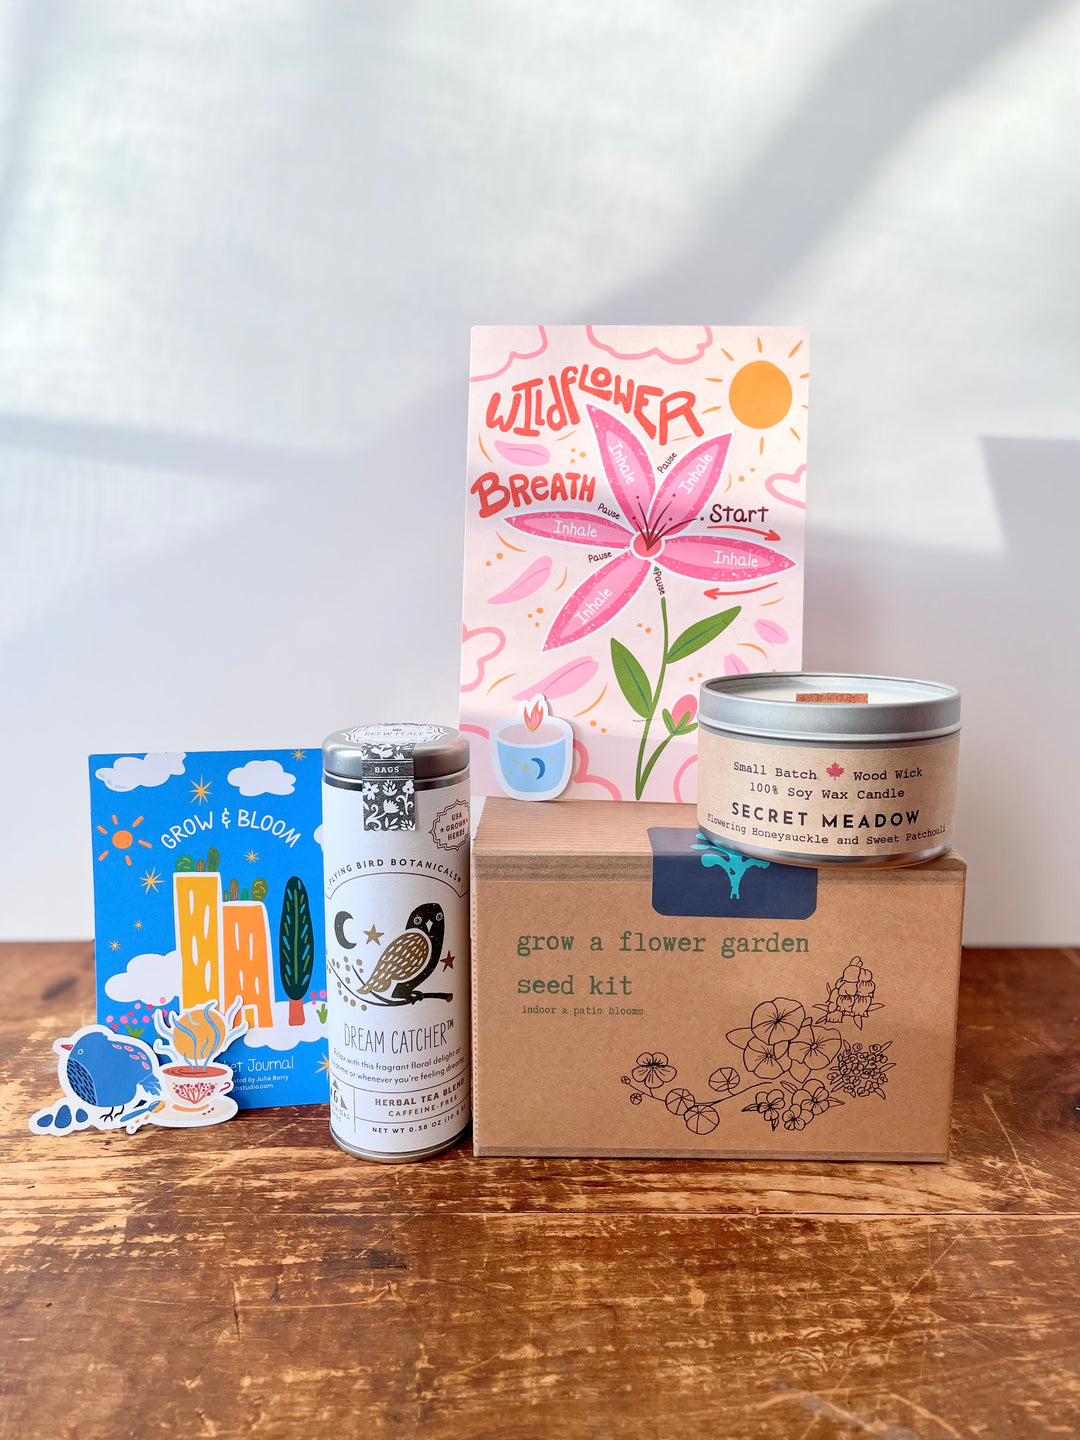 "Blooming Bright" Growing Gift Box: Flower Garden Kit, Soy Candle (Honeysuckle + Patchouli), Tulip Tote Bag, Wildflower Meditation Card, "Dream Catcher" Floral Tea, Pocket Journal